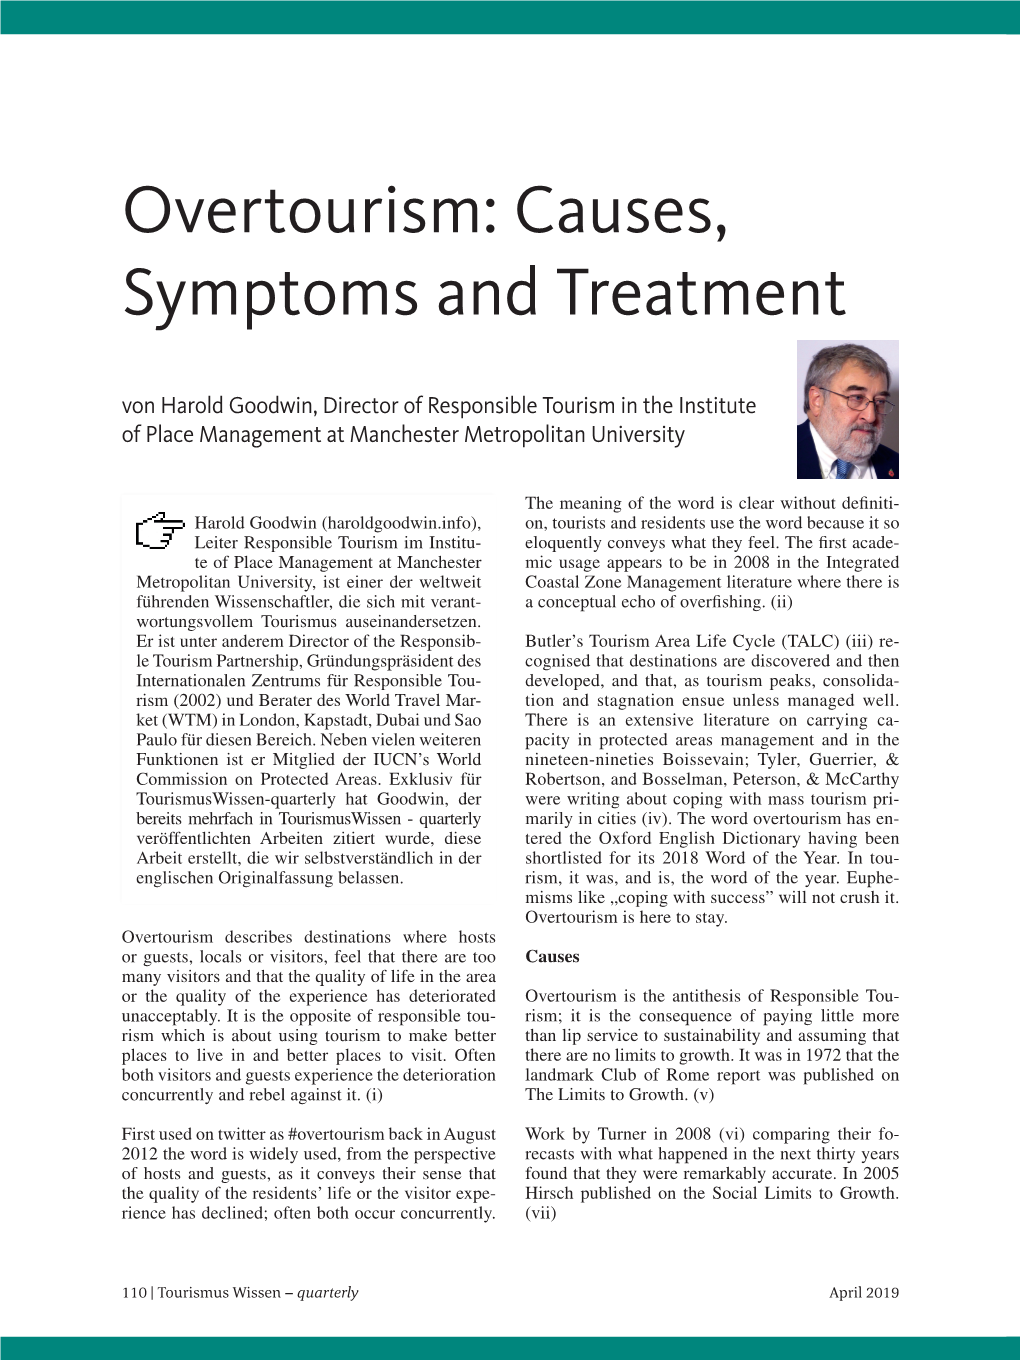 Overtourism: Causes, Symptoms and Treatment